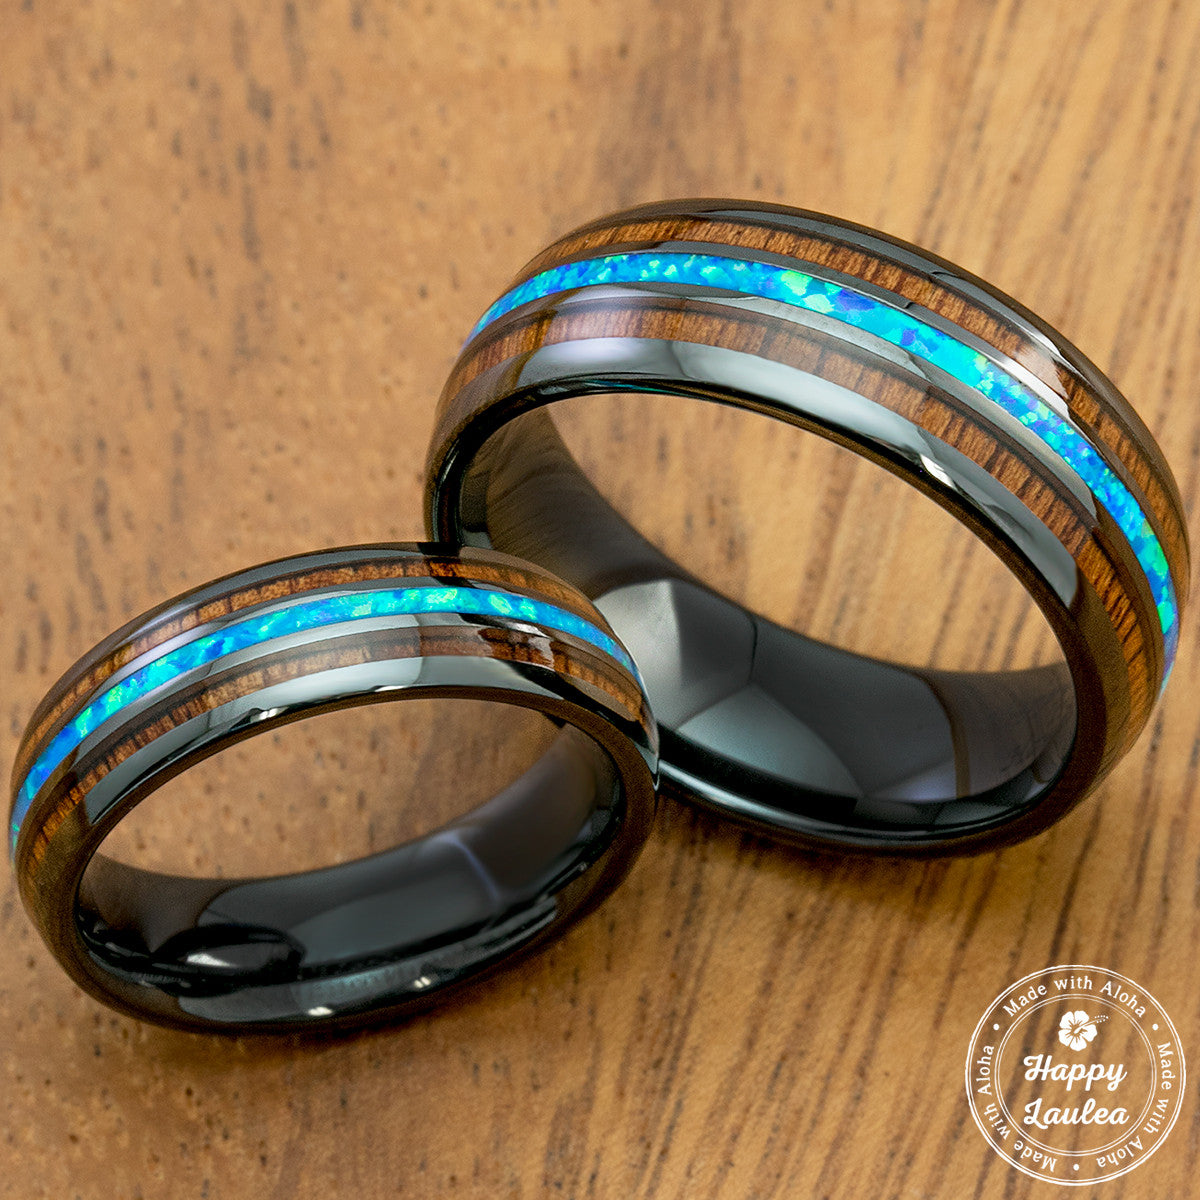 Pair of HI-TECH Black Ceramic Rings with Blue Opal & Koa Wood Tri Inlay - 6&8mm, Dome Shape, Comfort Fitment